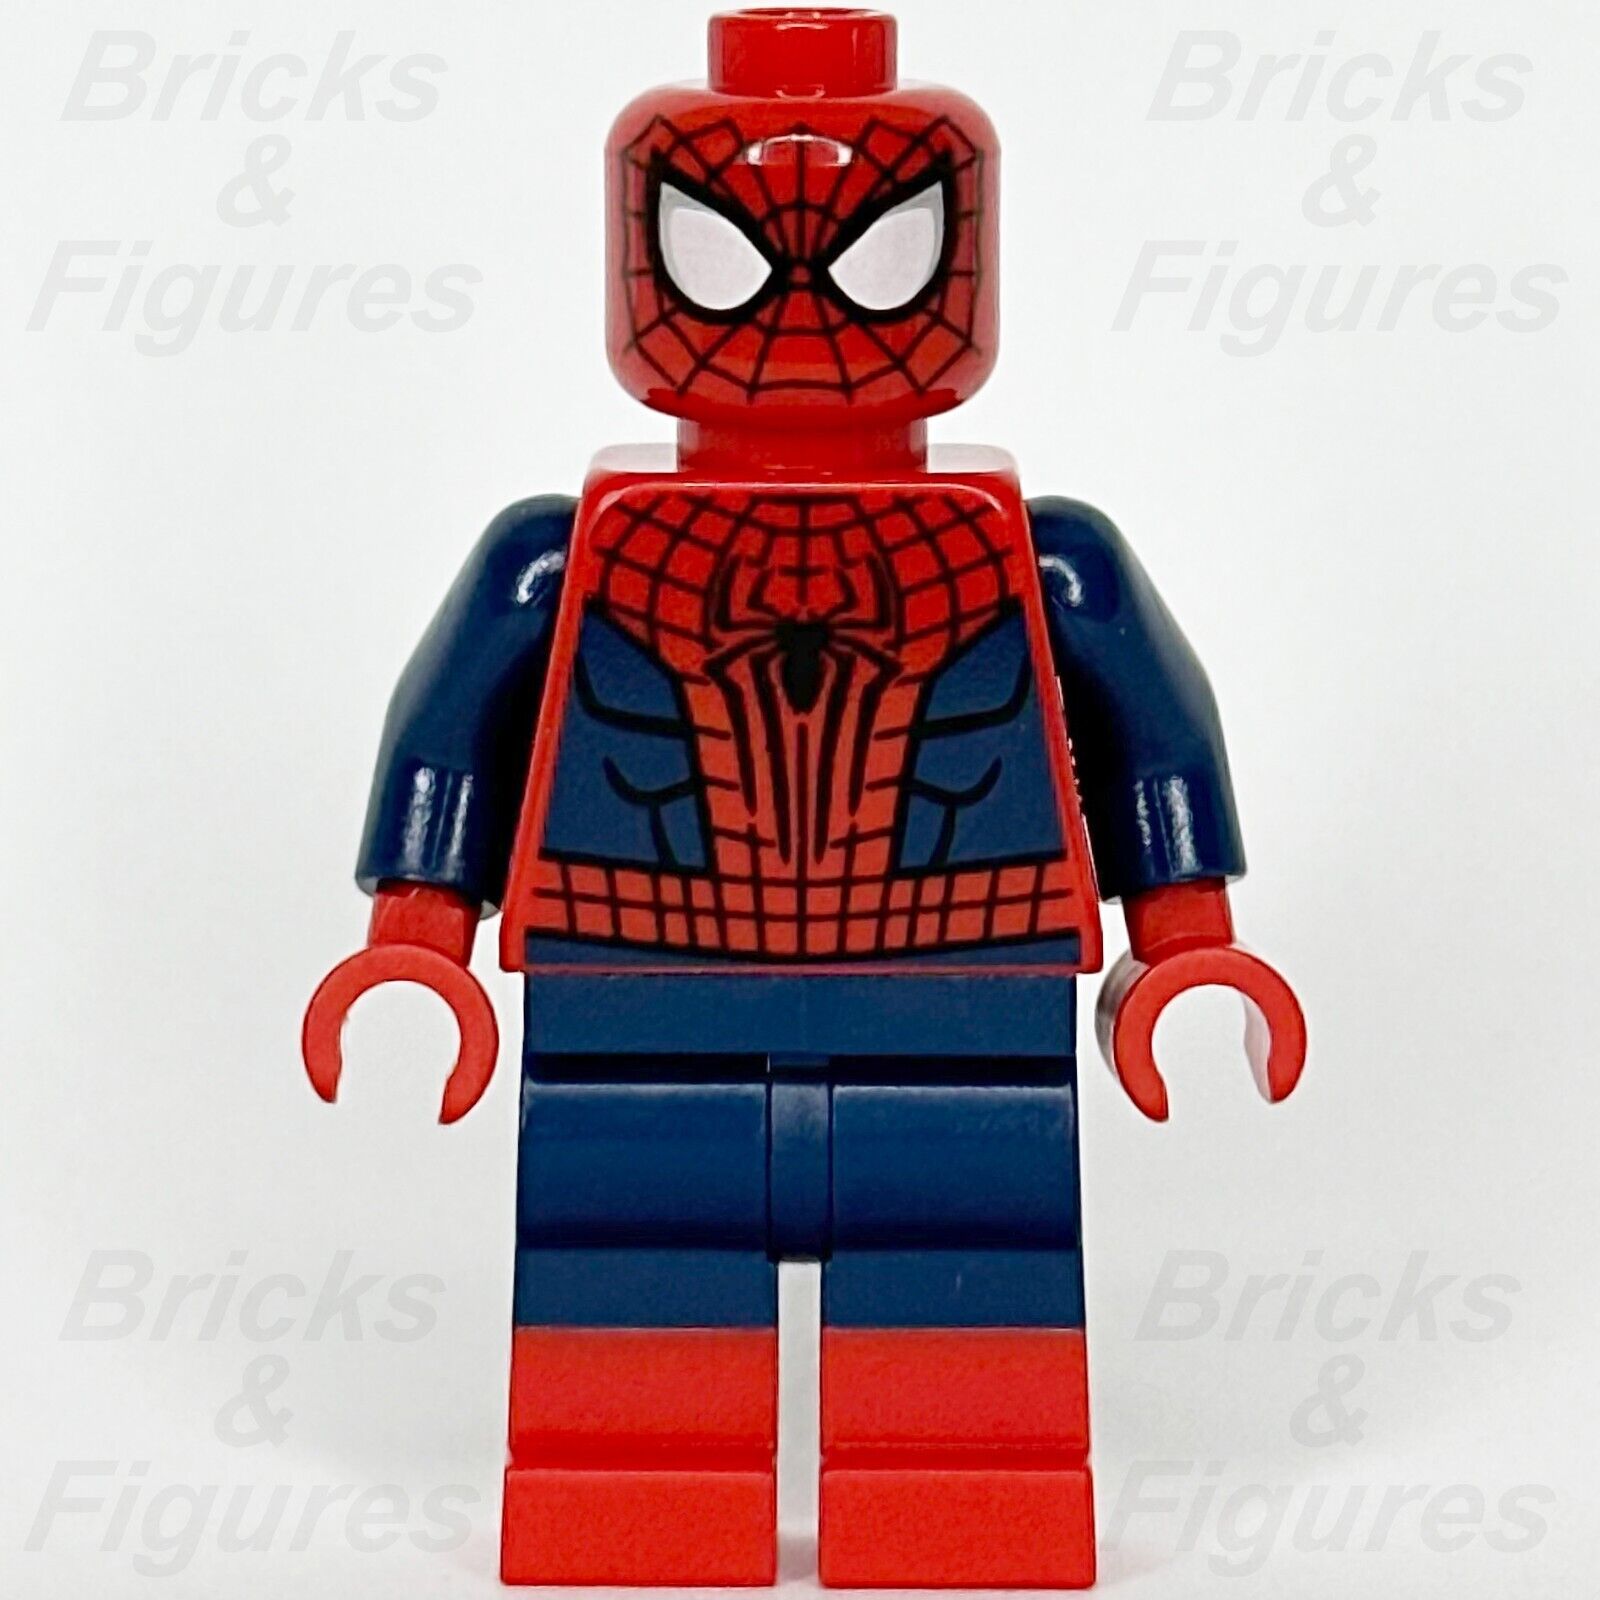 LEGO Super Heroes The Amazing Spider-Man Minifigure Peter Parker 76261 sh889